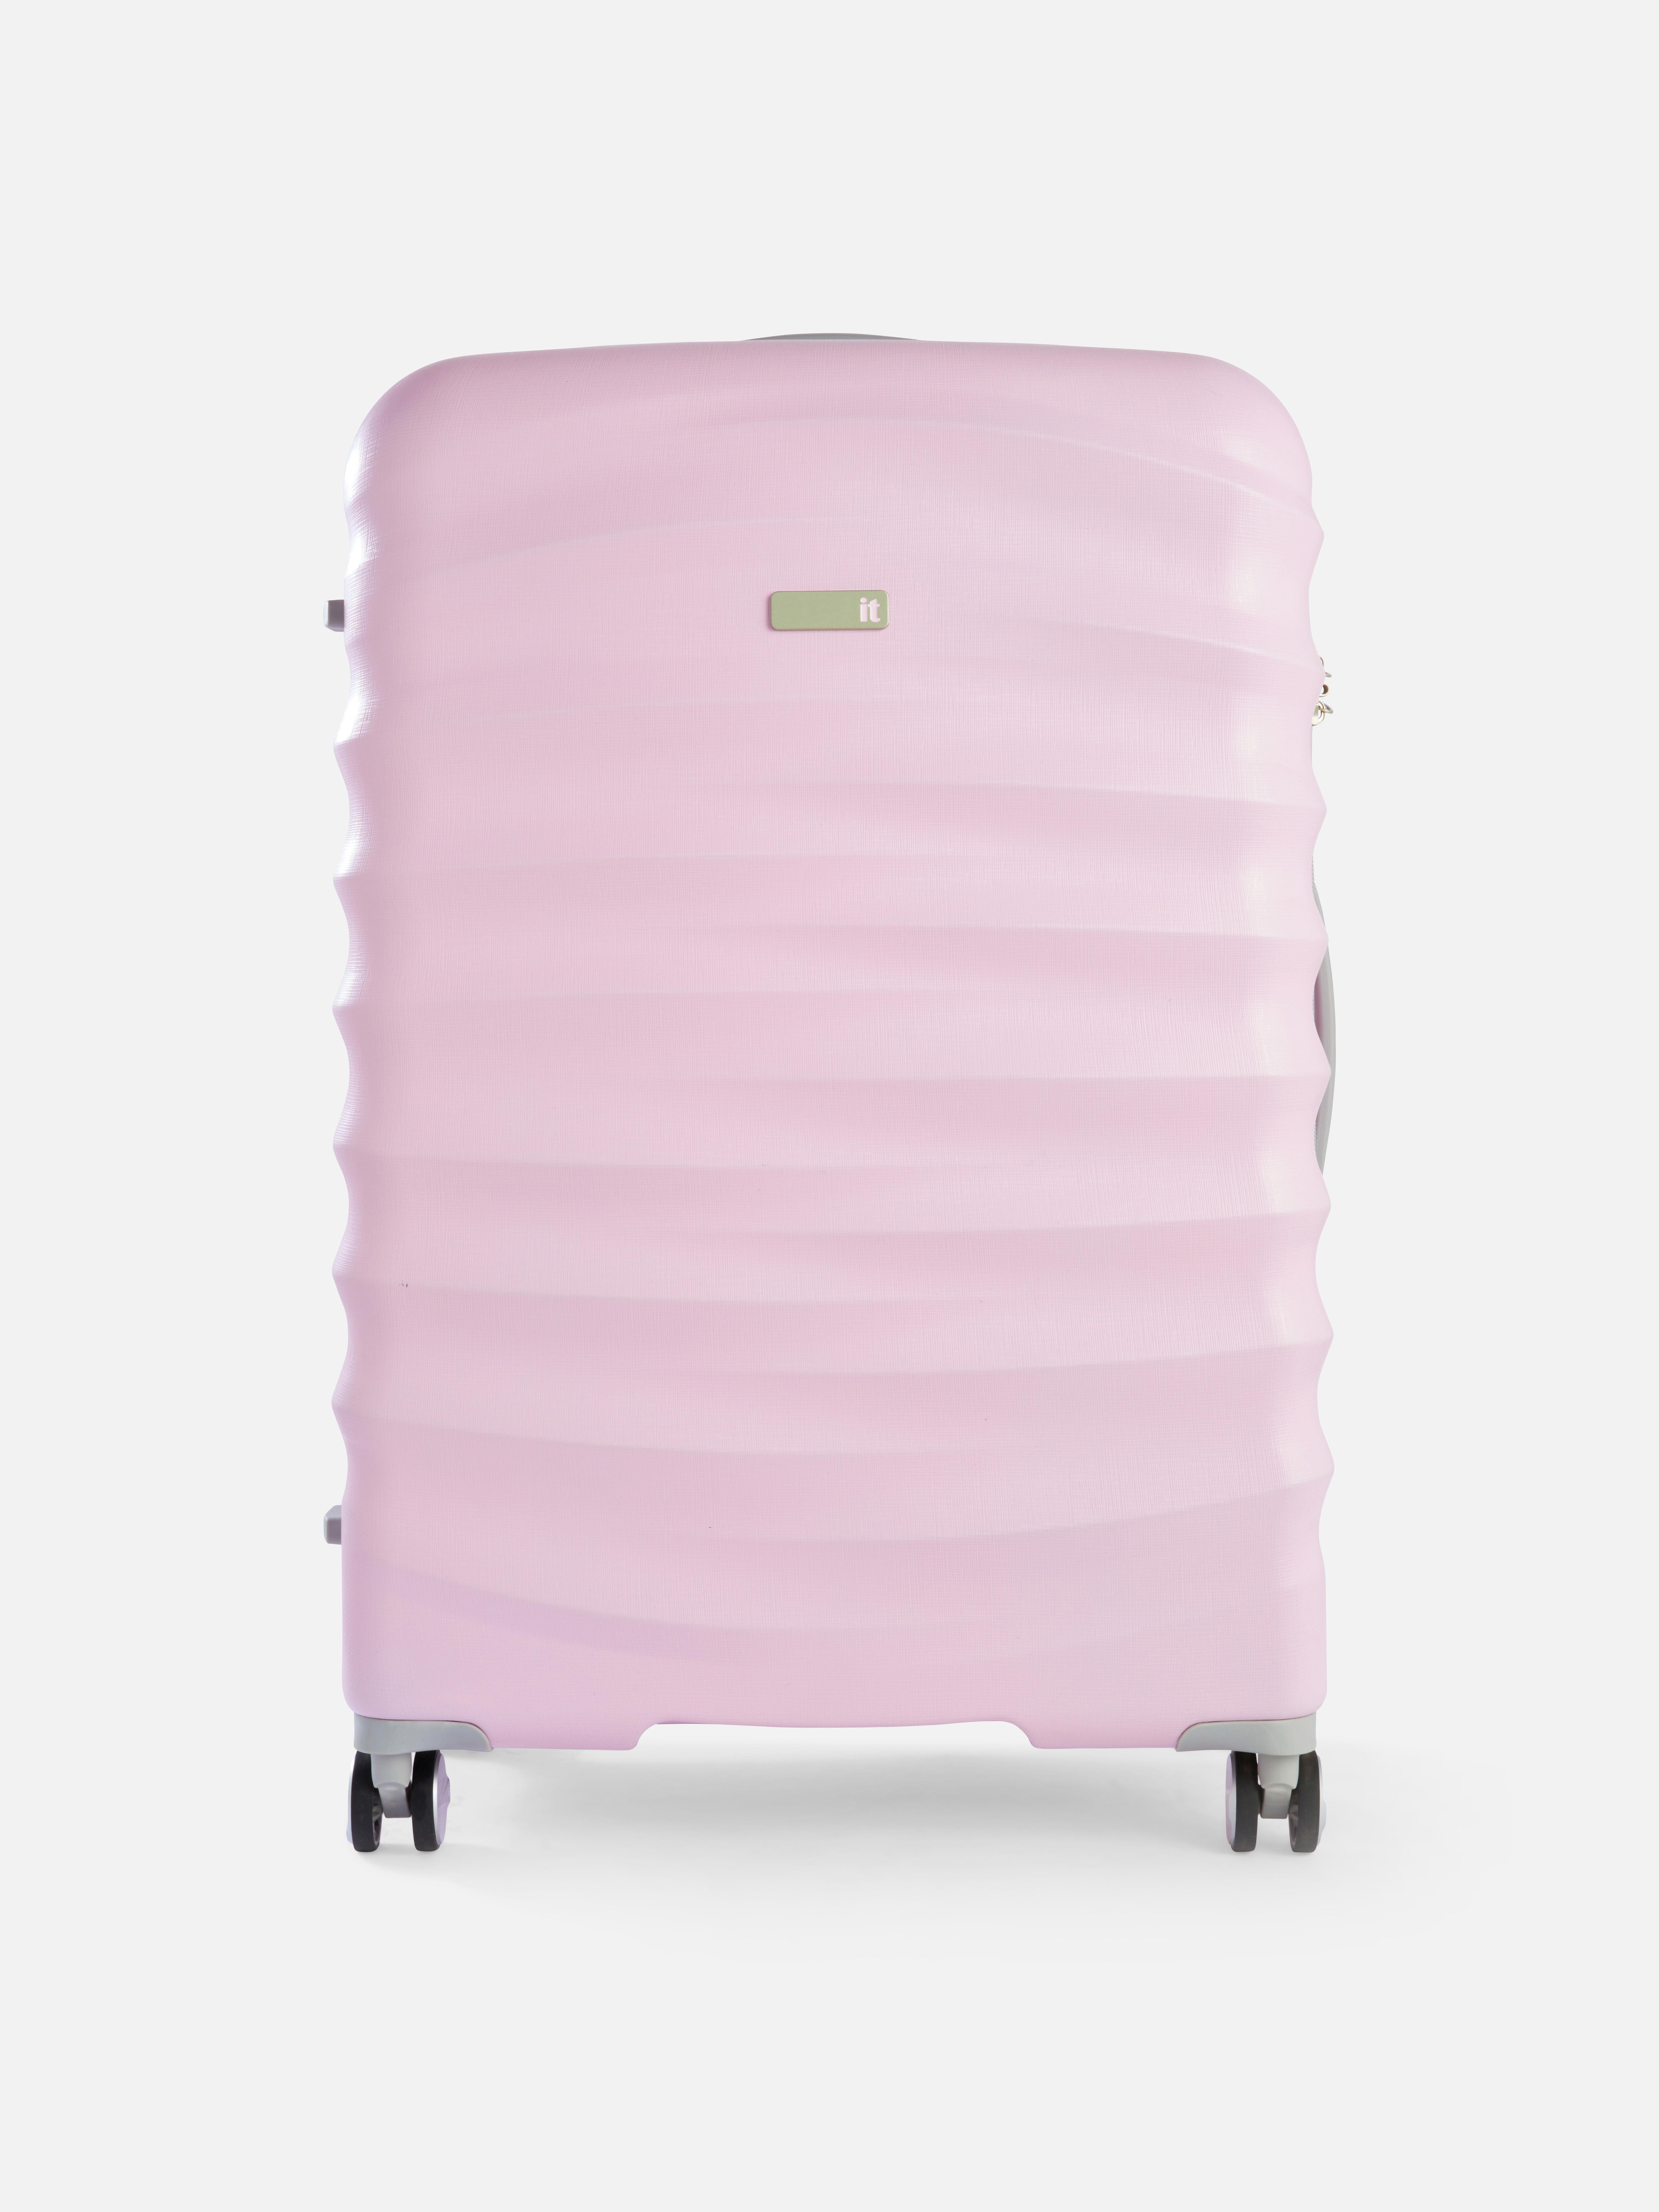 Textured Hard Shell Travel Suitcase Pink